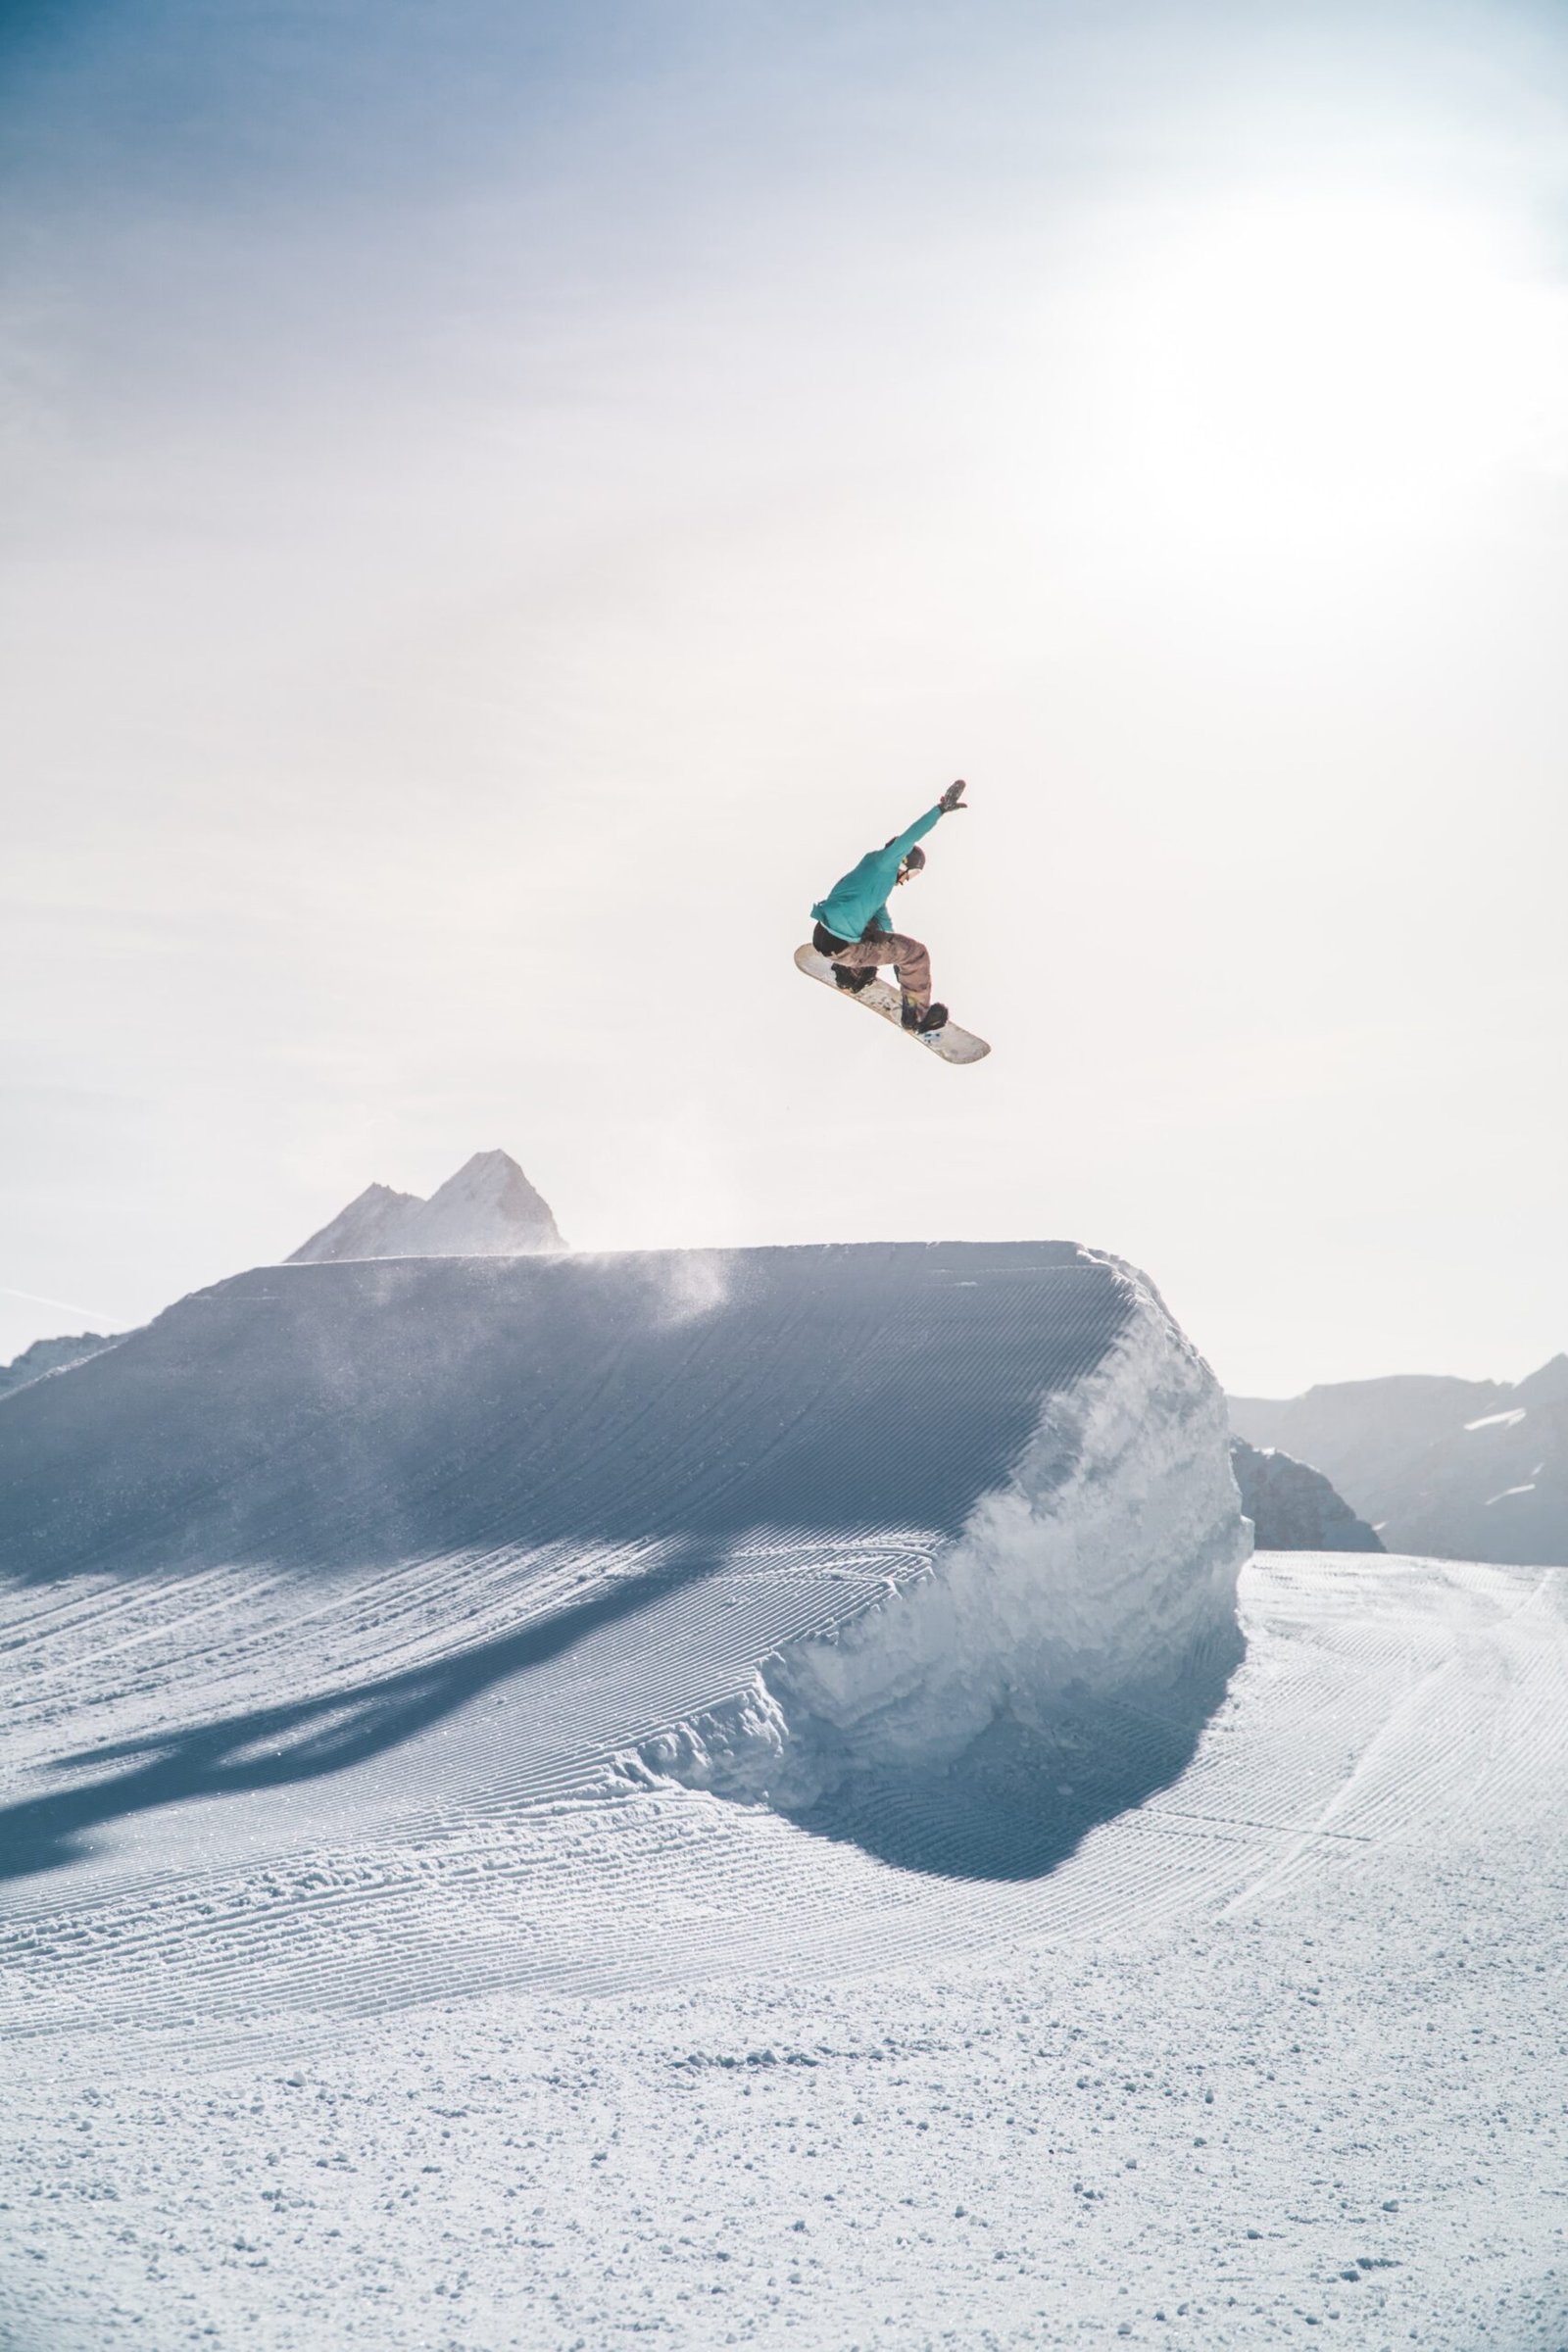 Exploring the Innovation and Performance of Lib Tech Snowboards